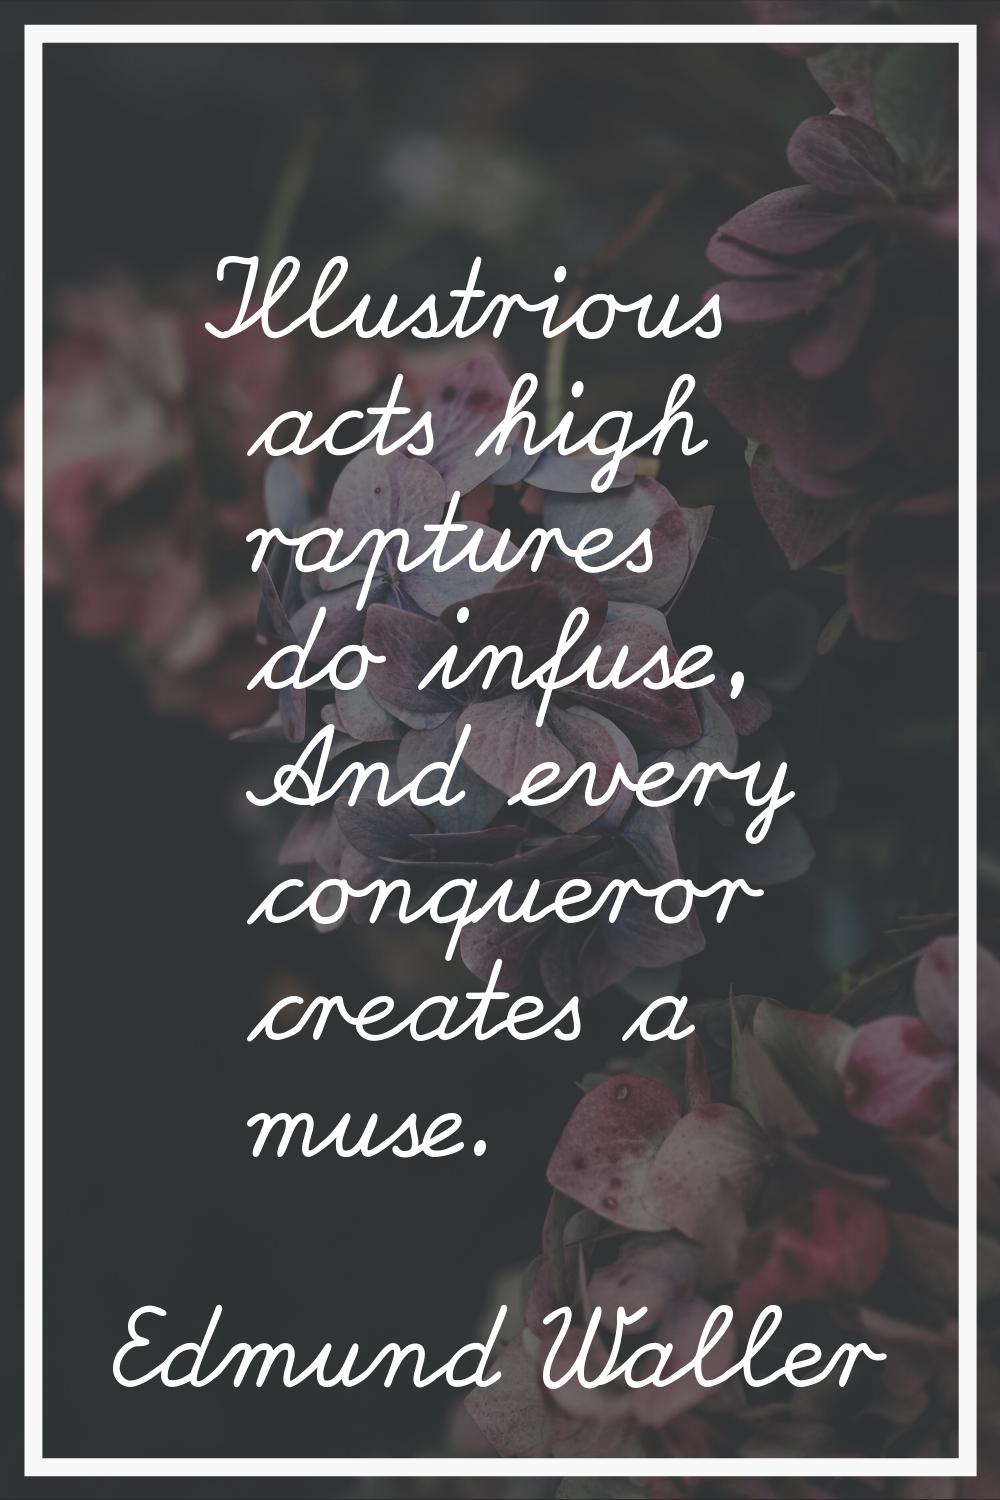 Illustrious acts high raptures do infuse, And every conqueror creates a muse.